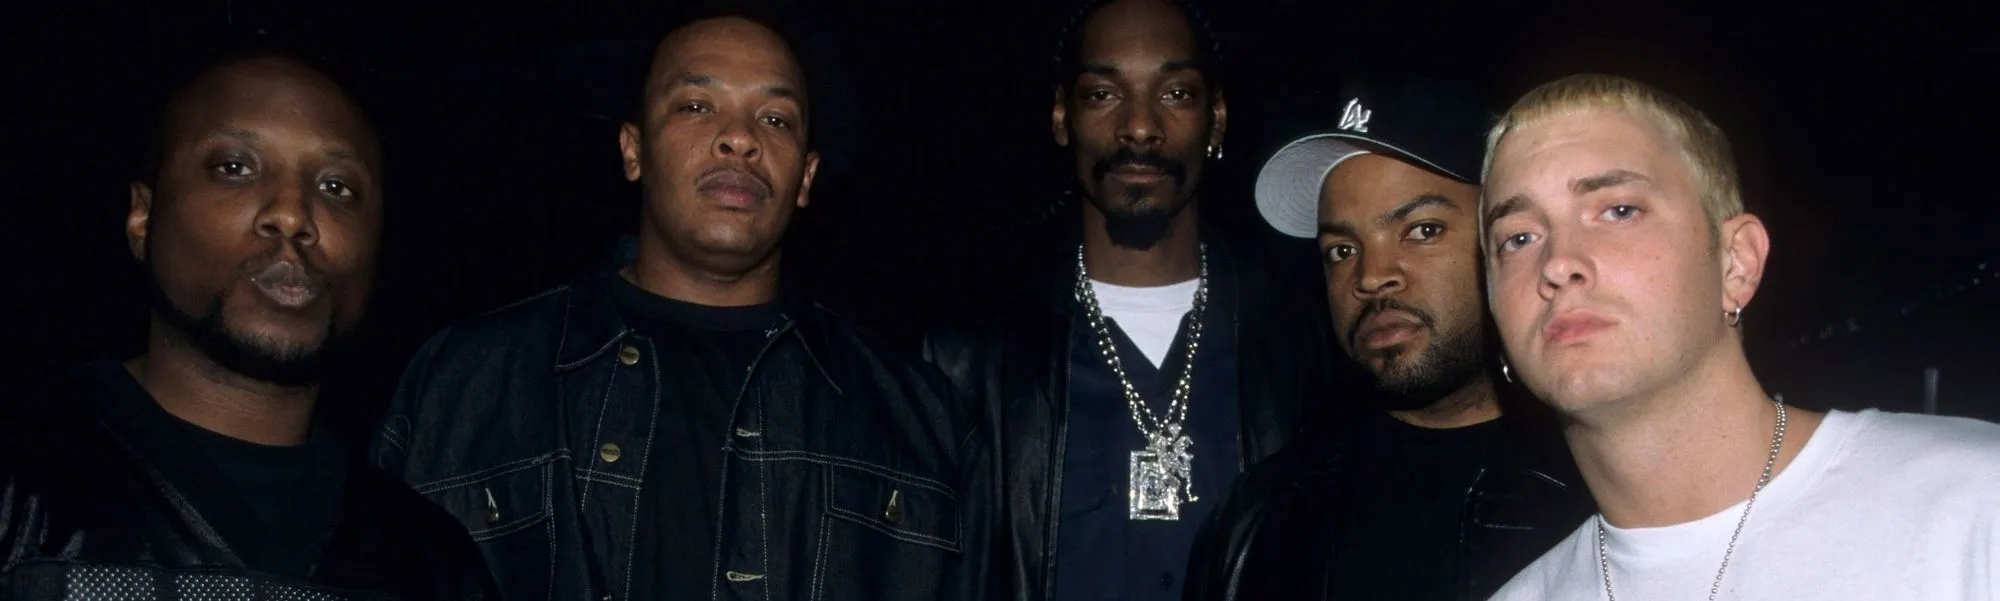 Dr DRE, Snoop Dogg, Ice Cube and Eminem, 2000